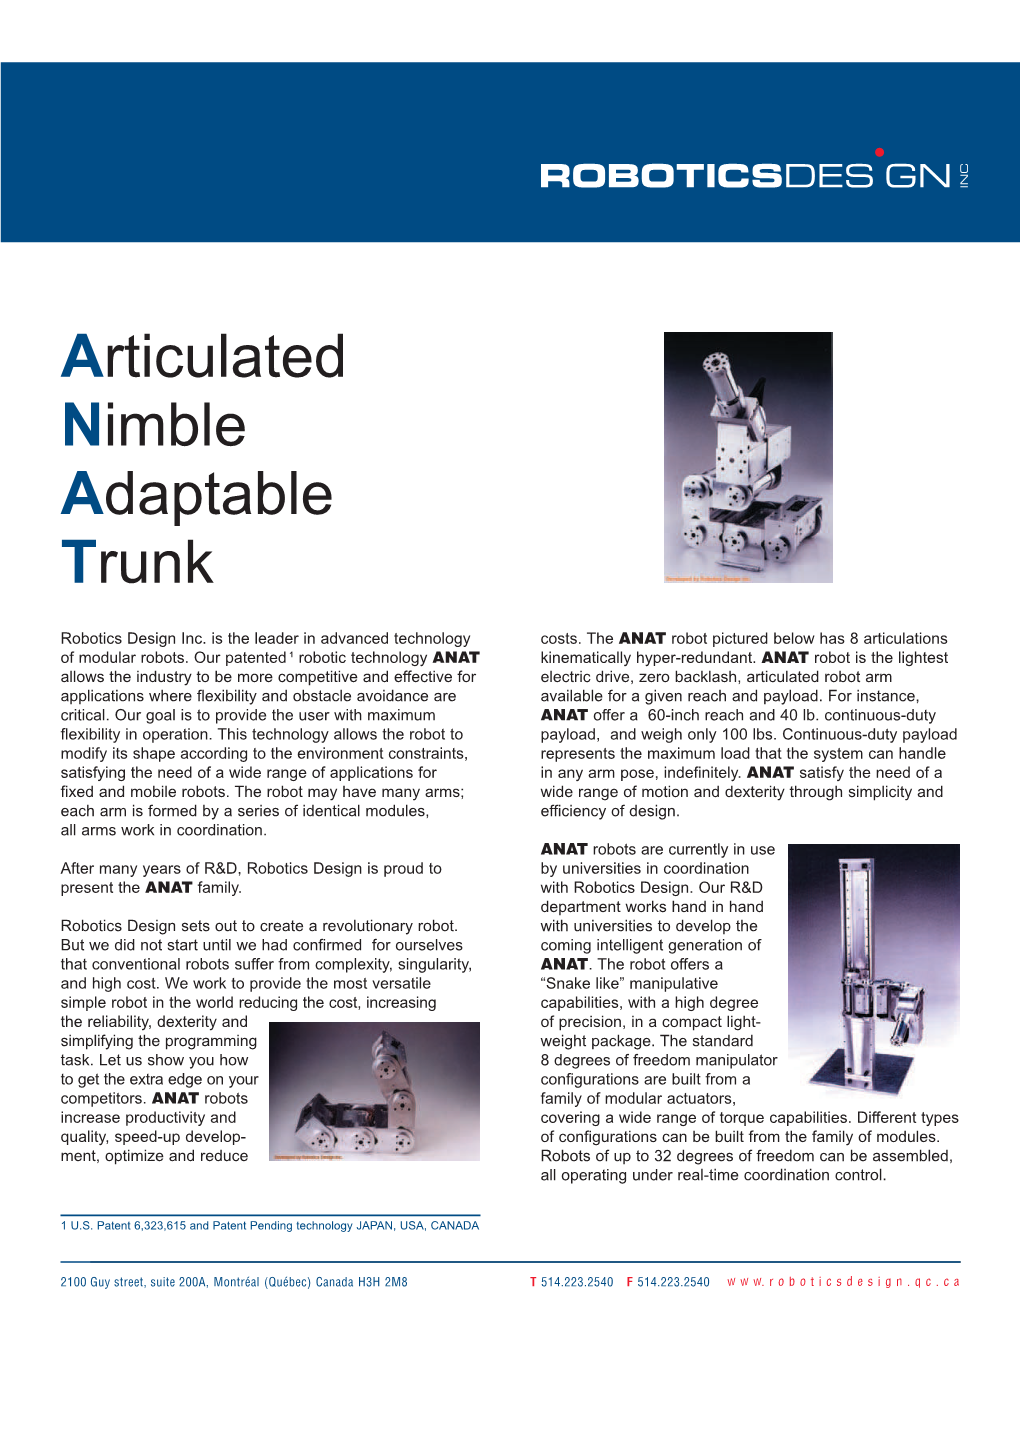 Articulated Nimble Adaptable Trunk